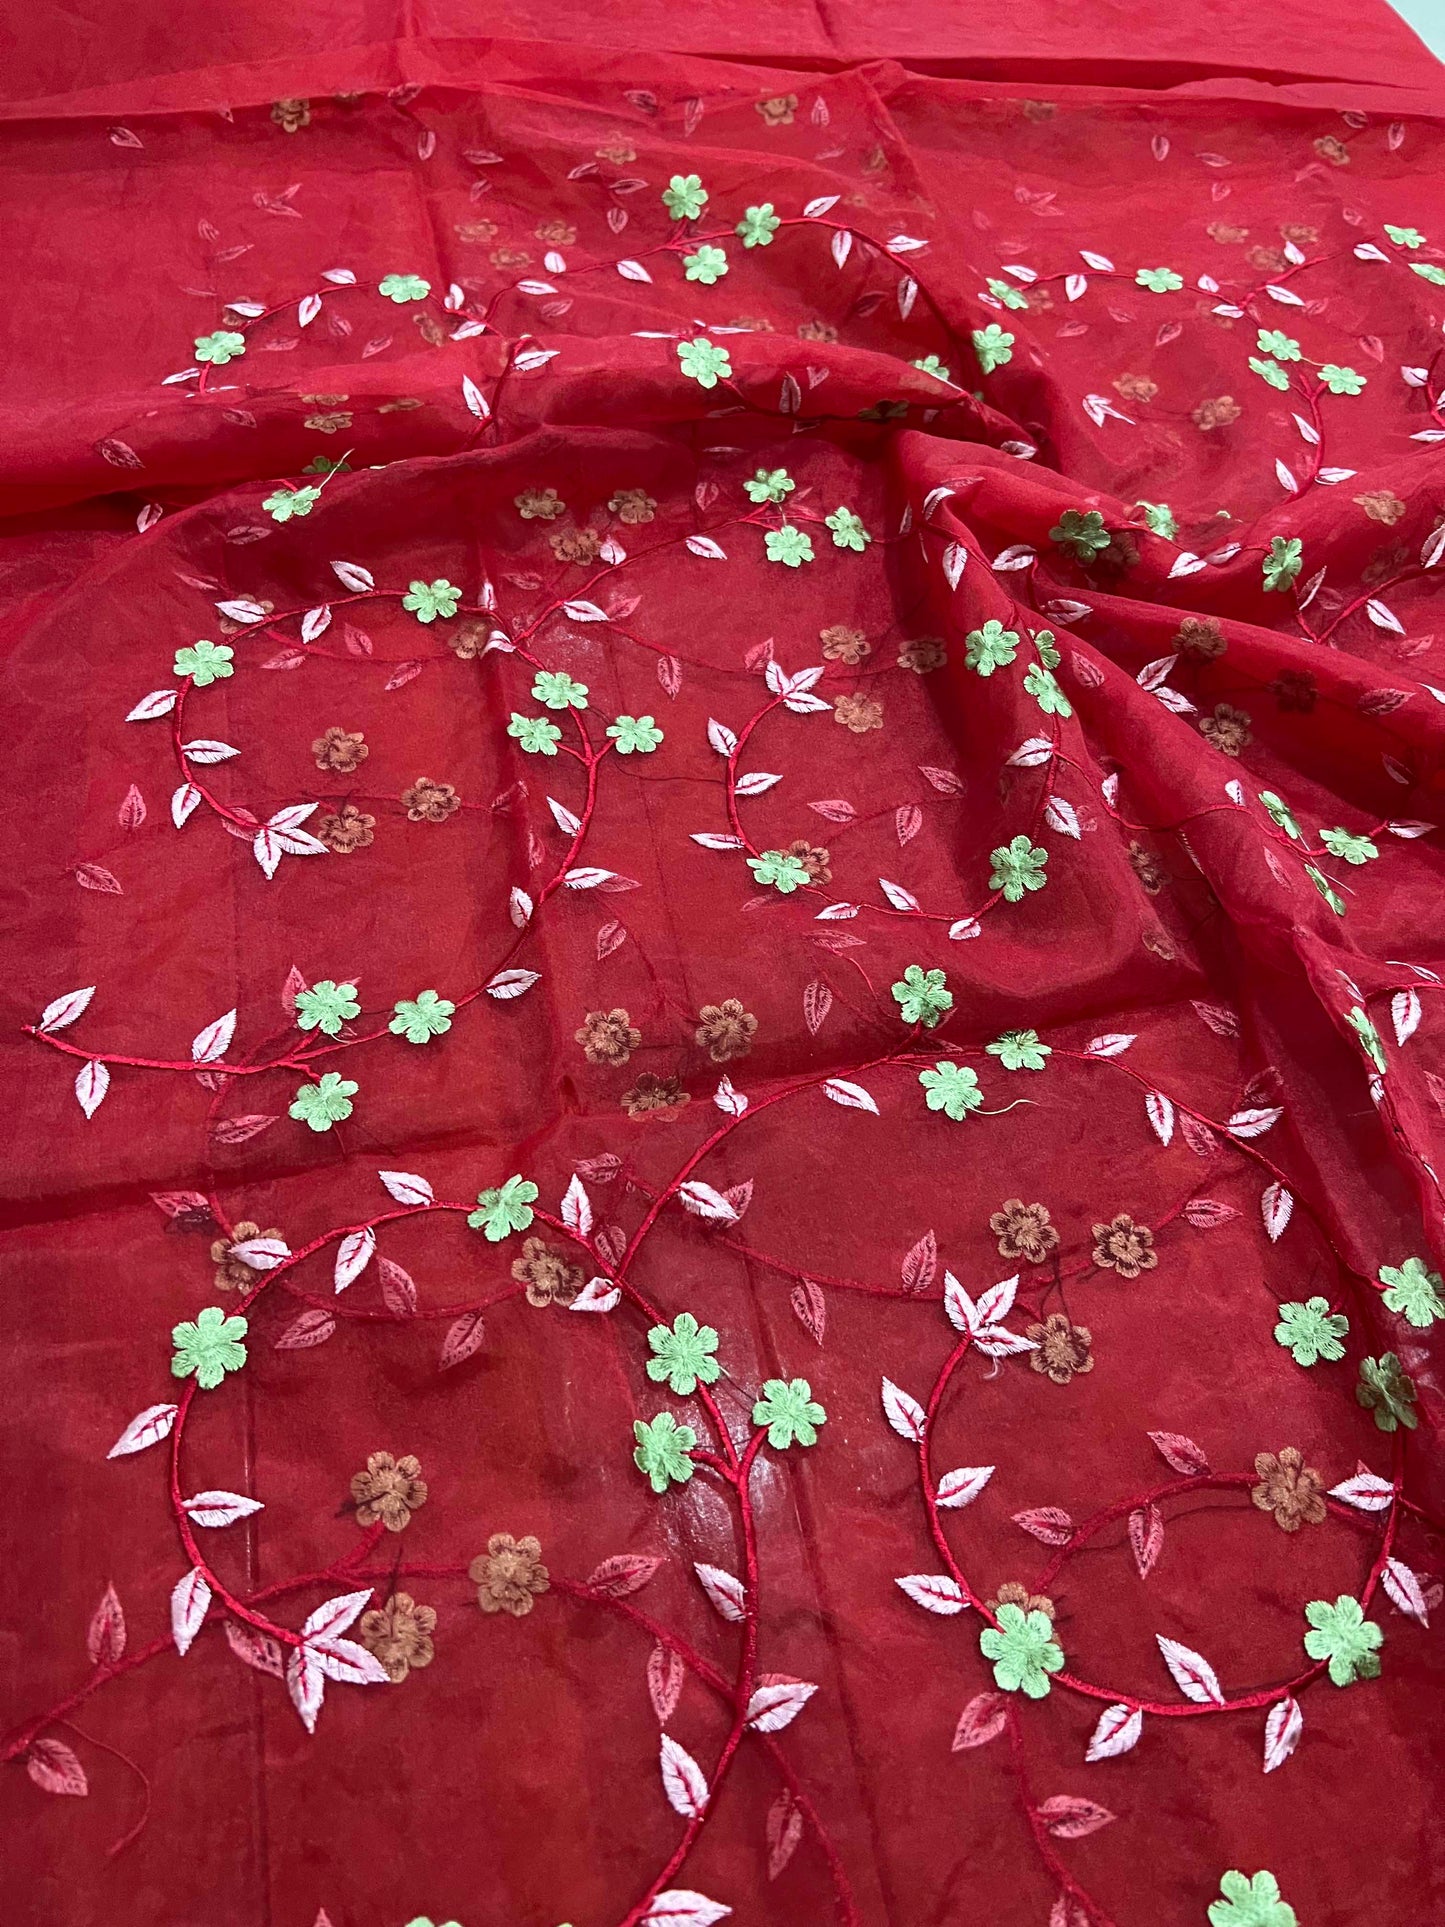 Southloom™ Semi Silk Churidar Salwar Suit Material in Light Green and Red with Embroidery Work